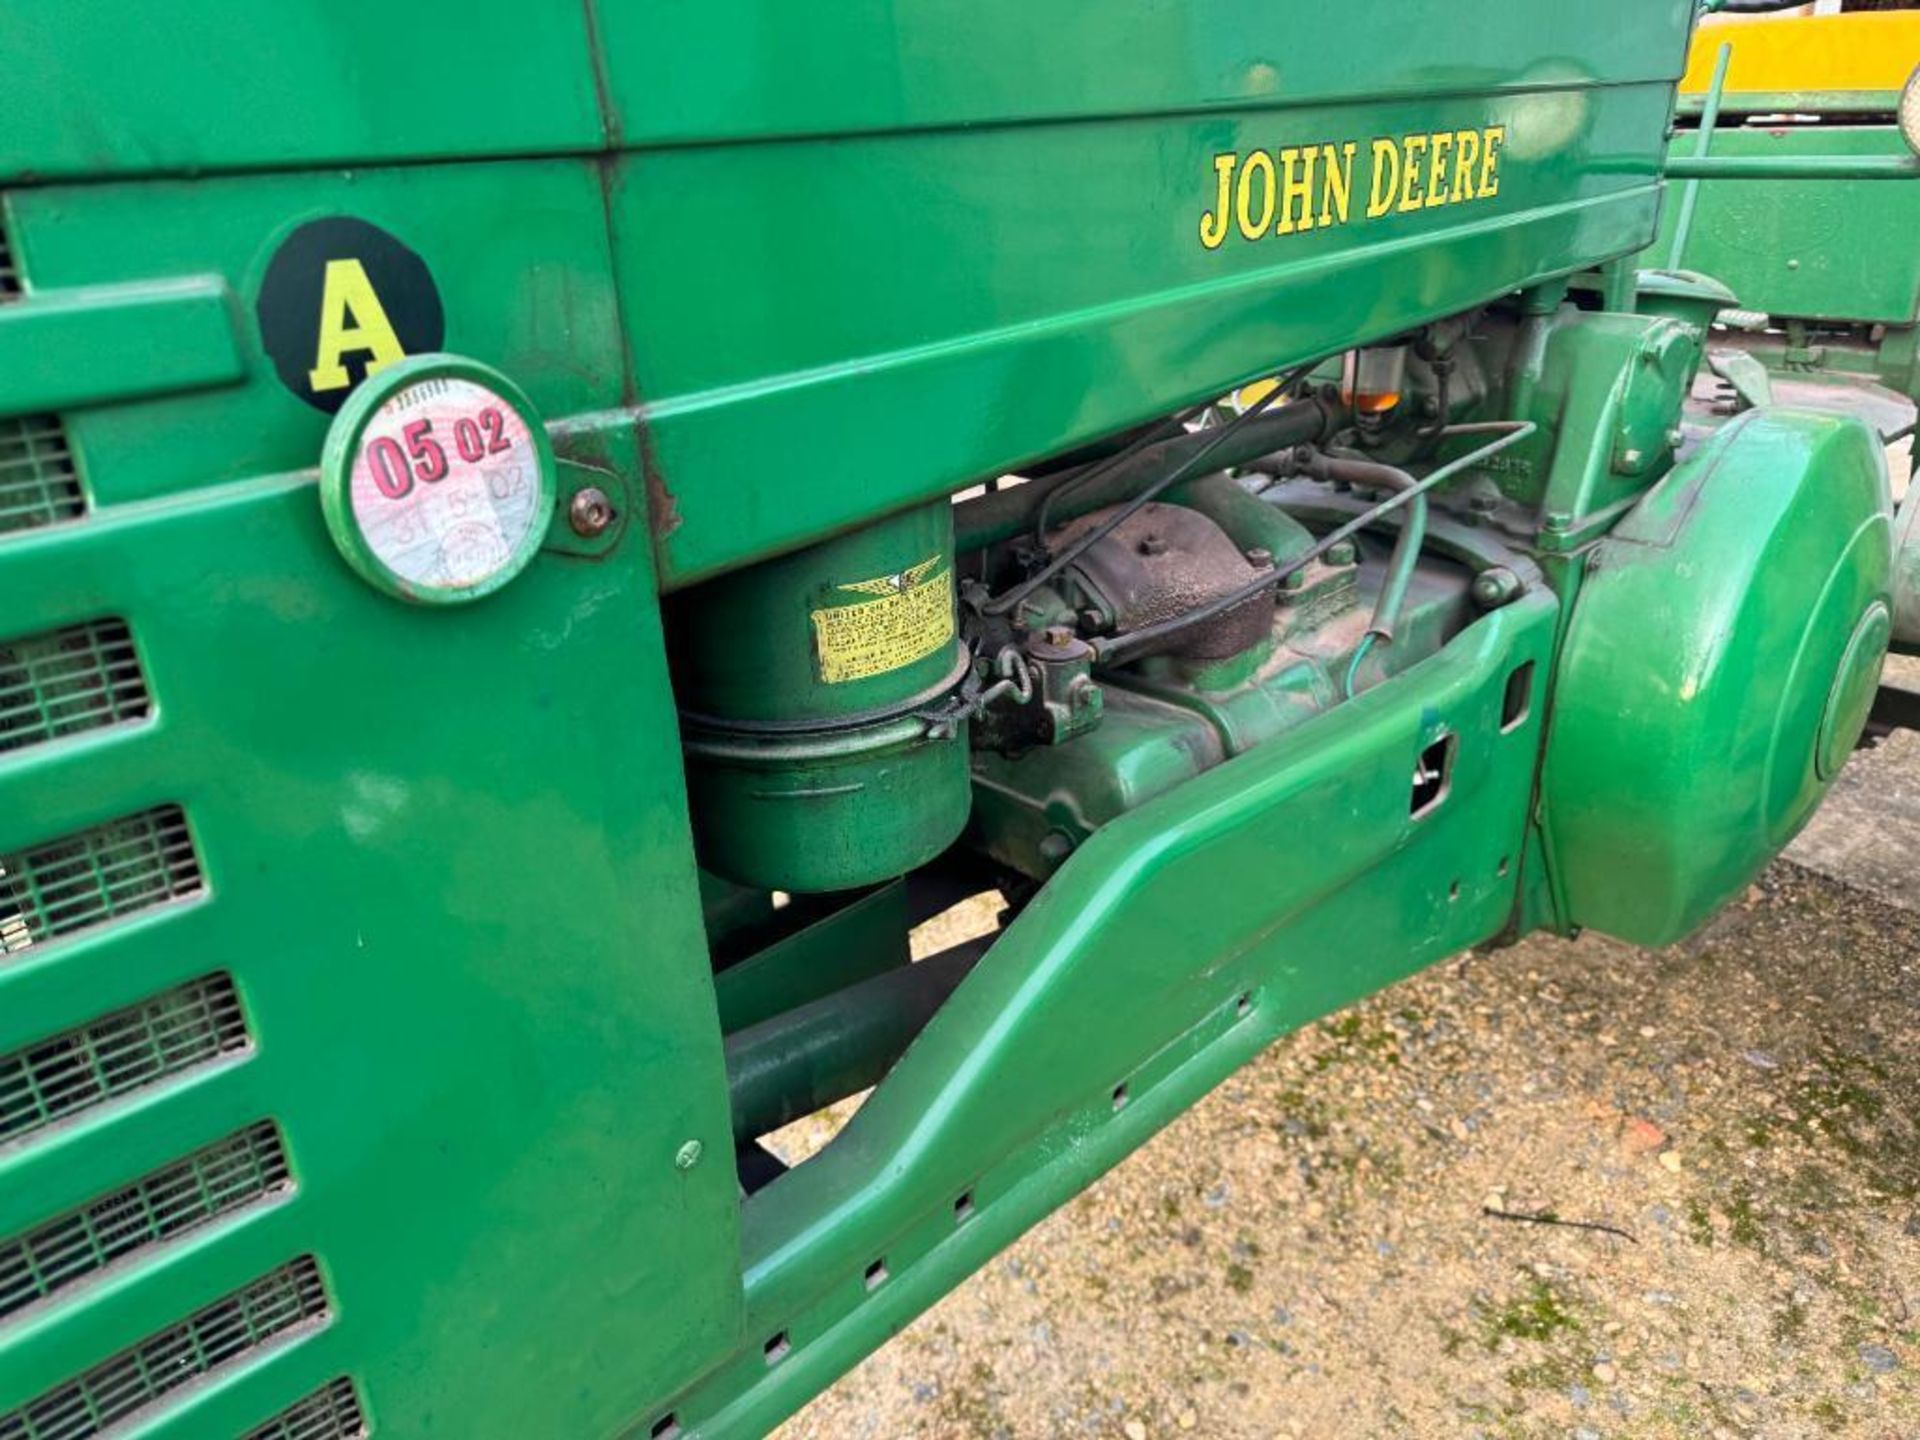 1948 John Deere Model A row crop tractor with side belt pulley, rear PTO and drawbar and twin front - Image 5 of 15